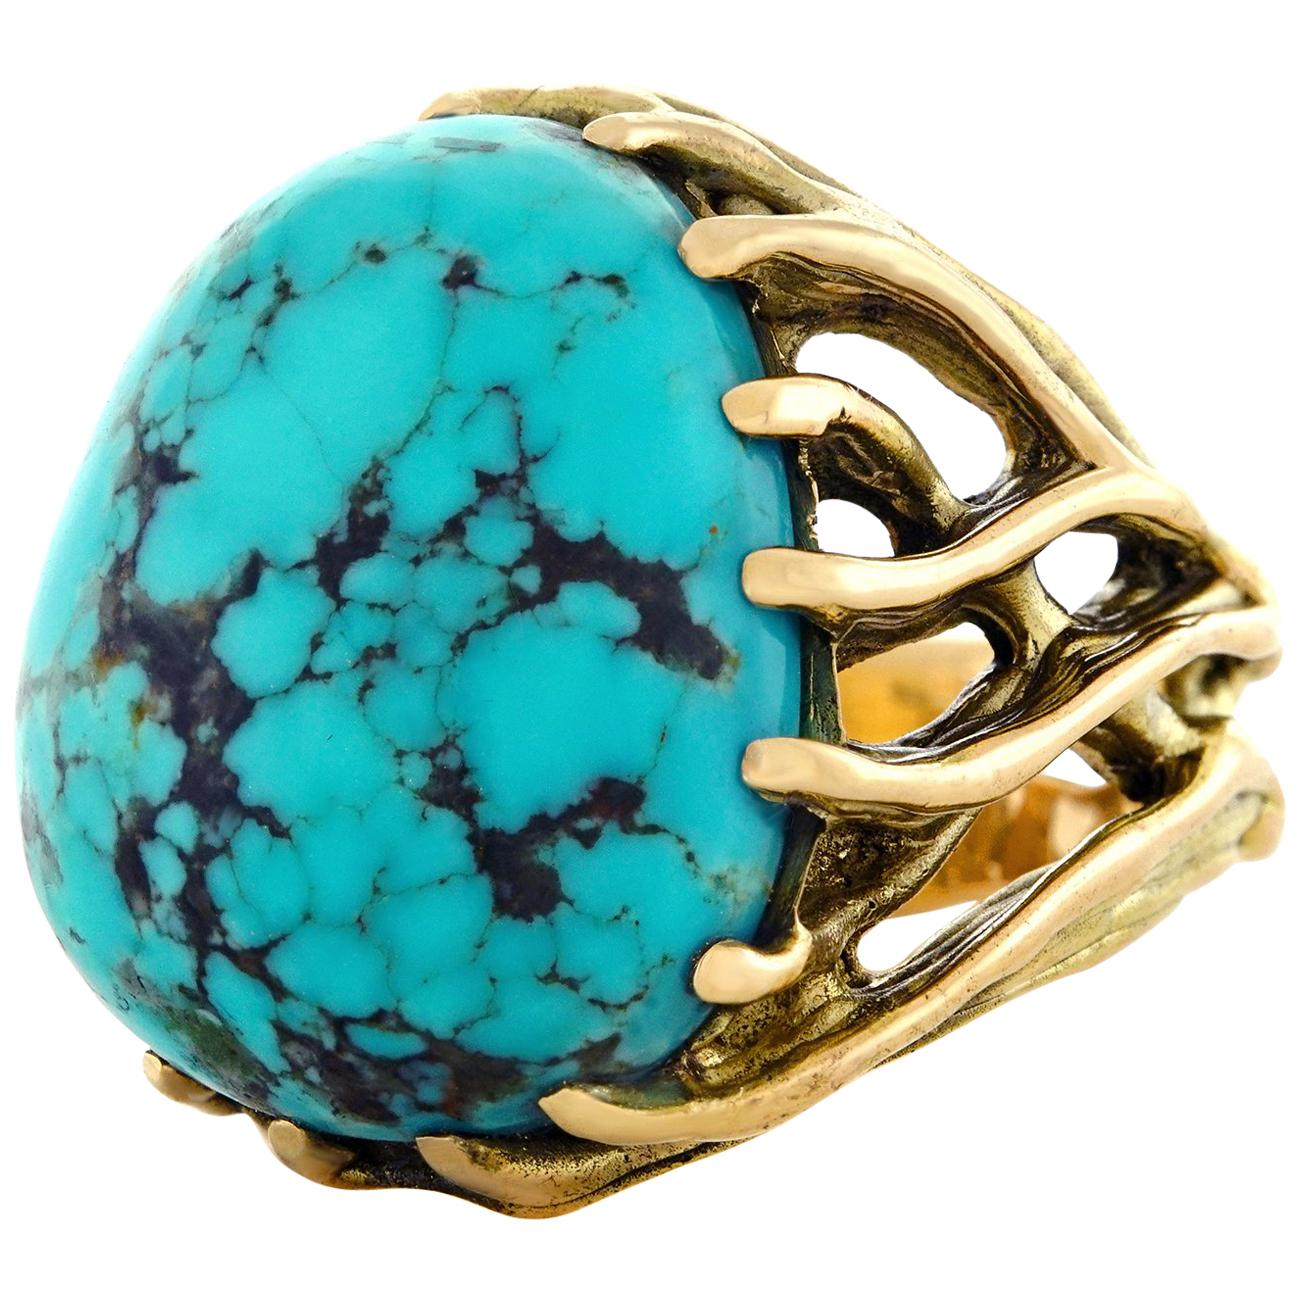 1960s Hippie Jewelry Turquoise Set Gold Ring